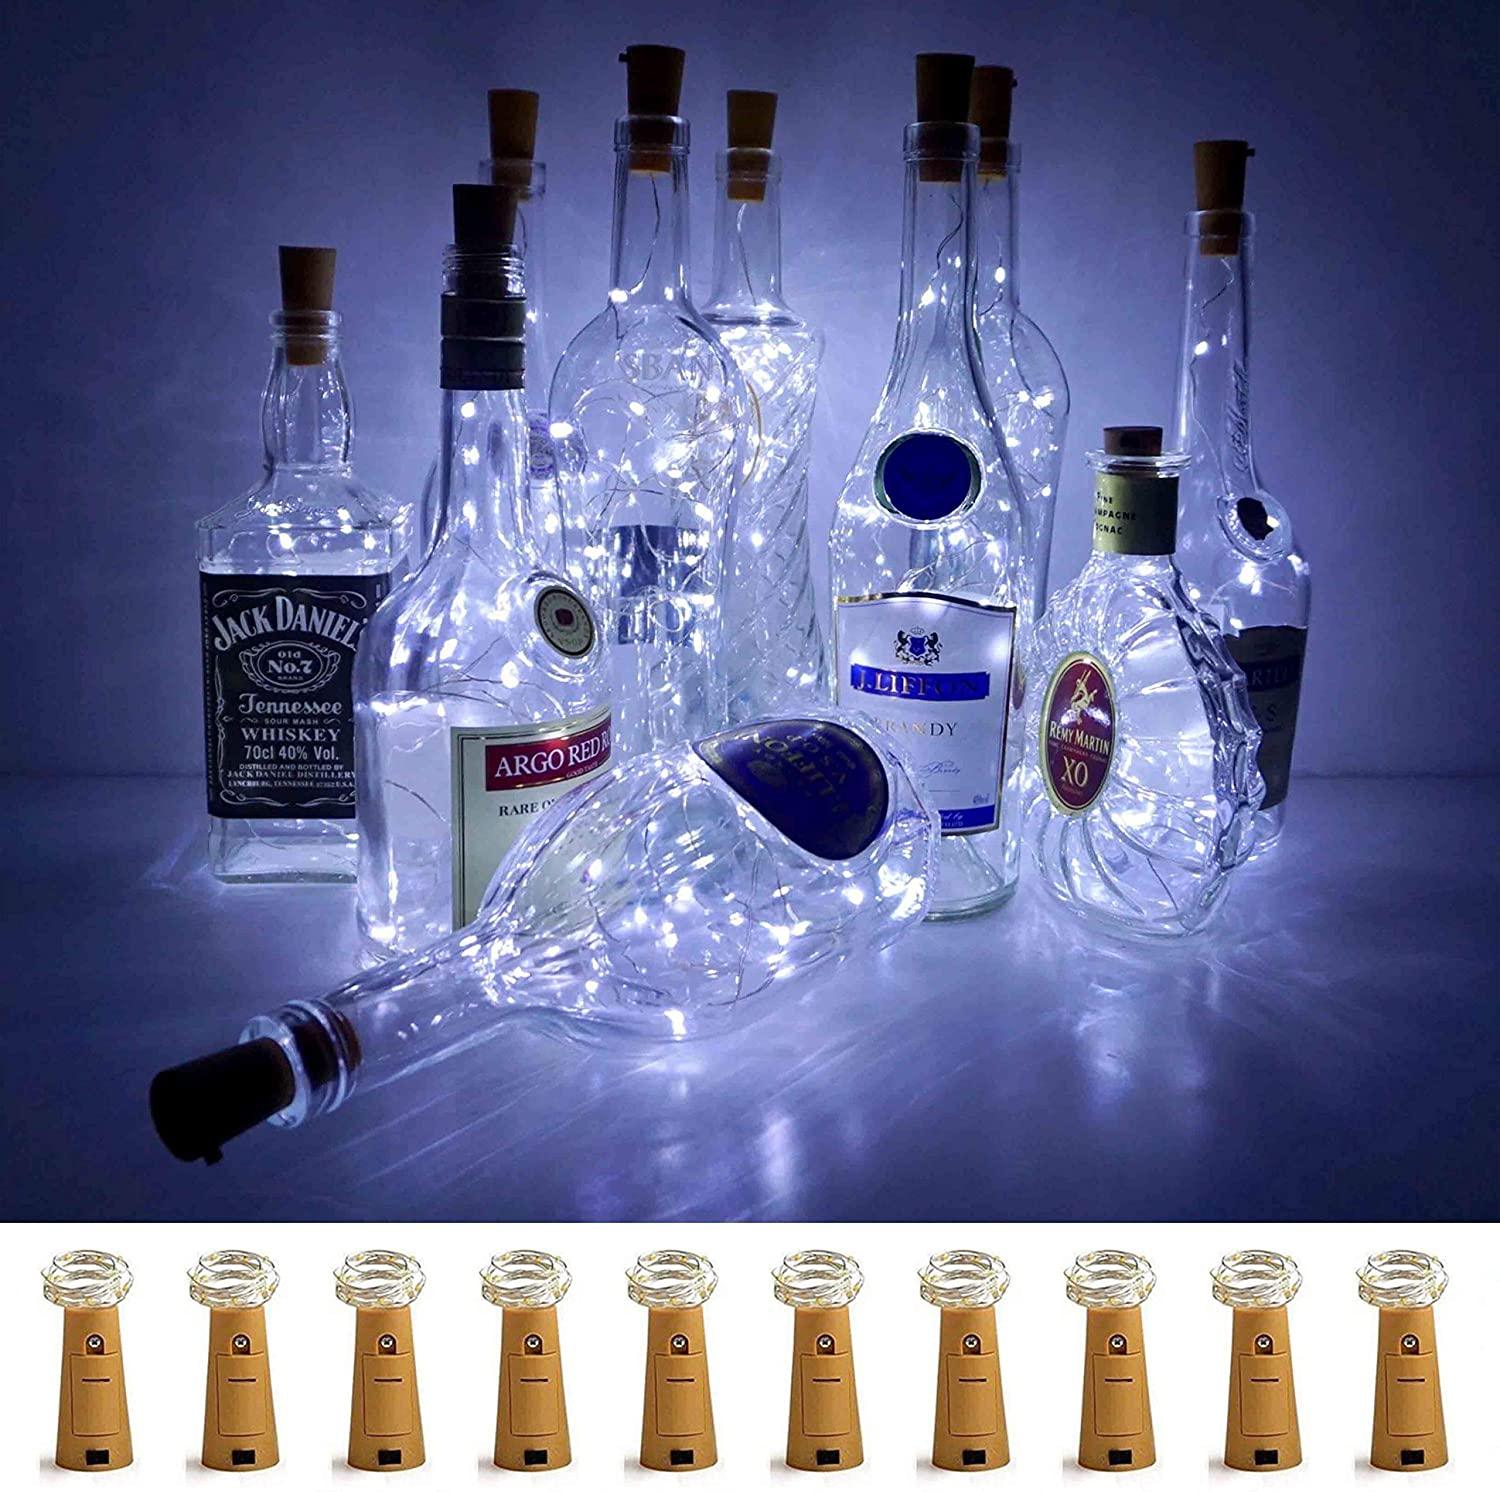 Wine Bottle Lights with Cork for Thanksgiving - Decotree.co Online Shop